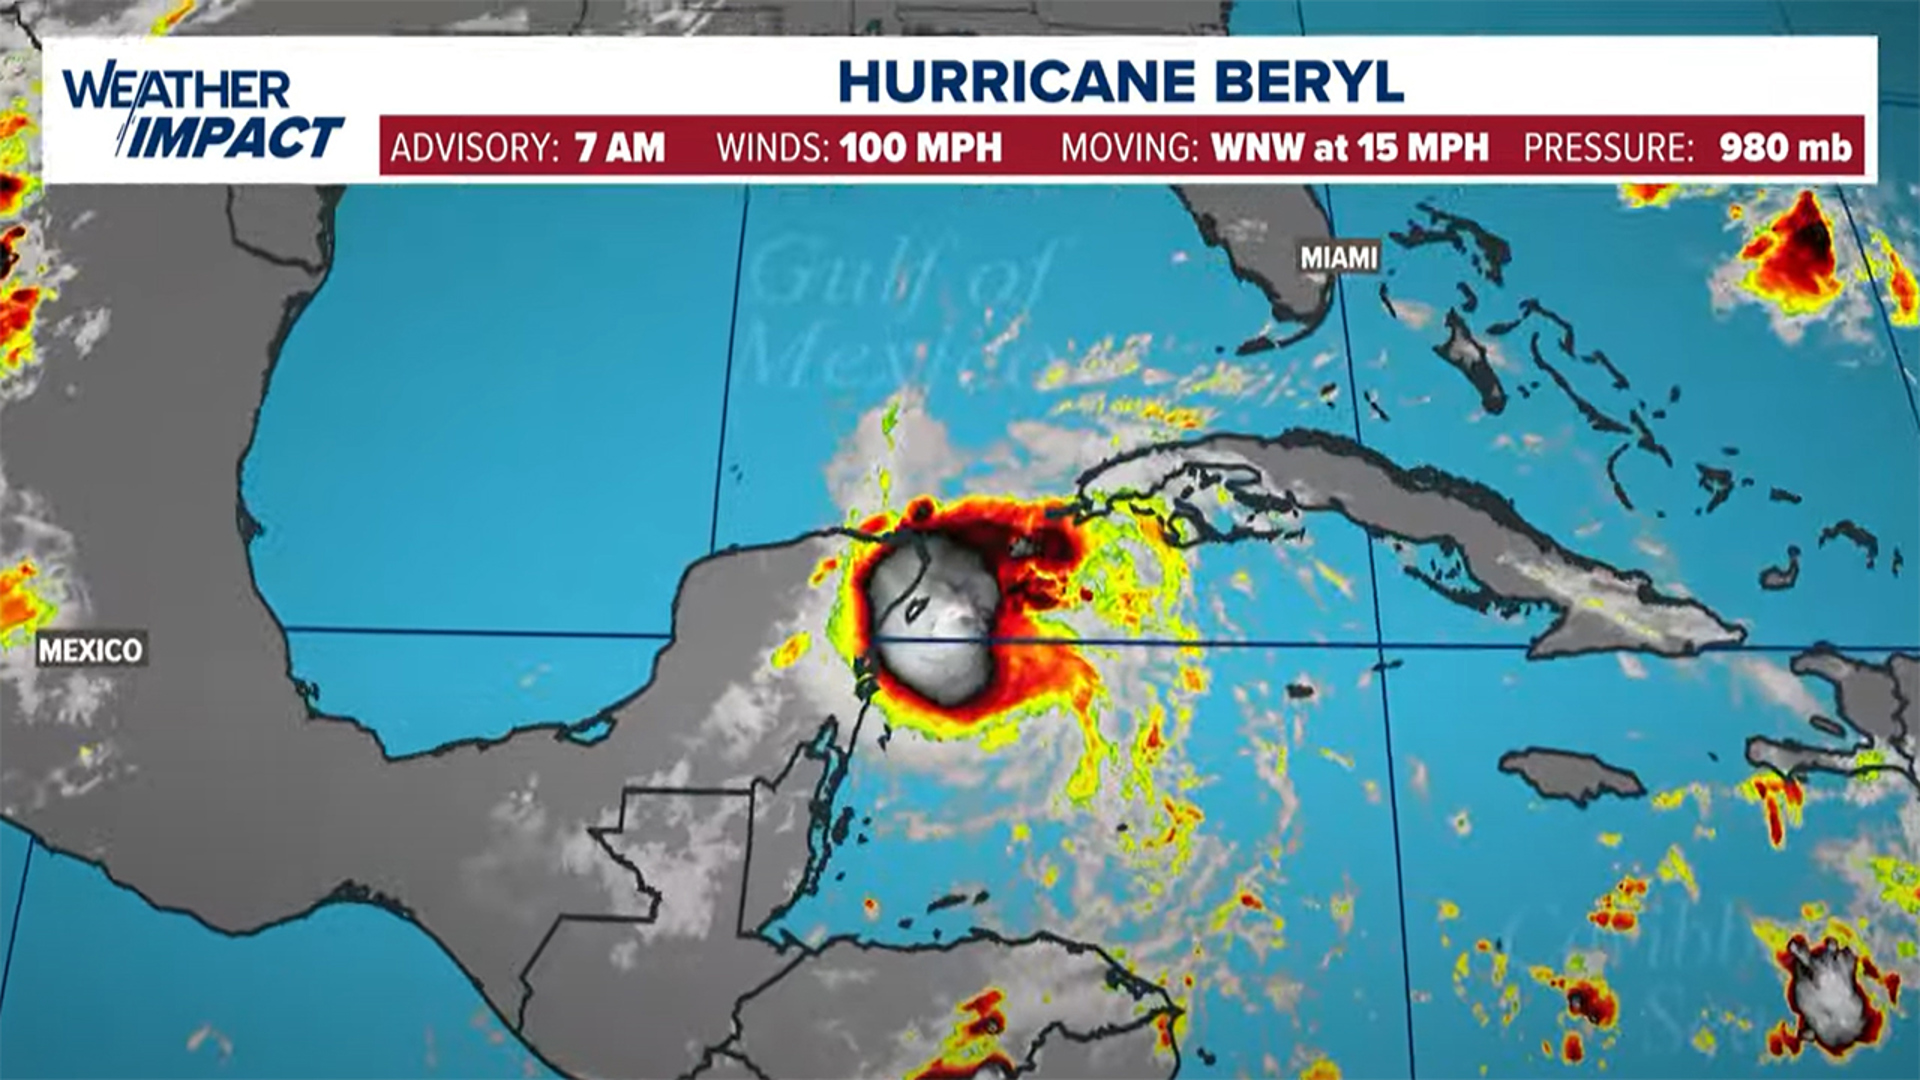 Hurricane Beryl is moving inland on the Yucatan Peninsula before heading into the Gulf of Mexico.